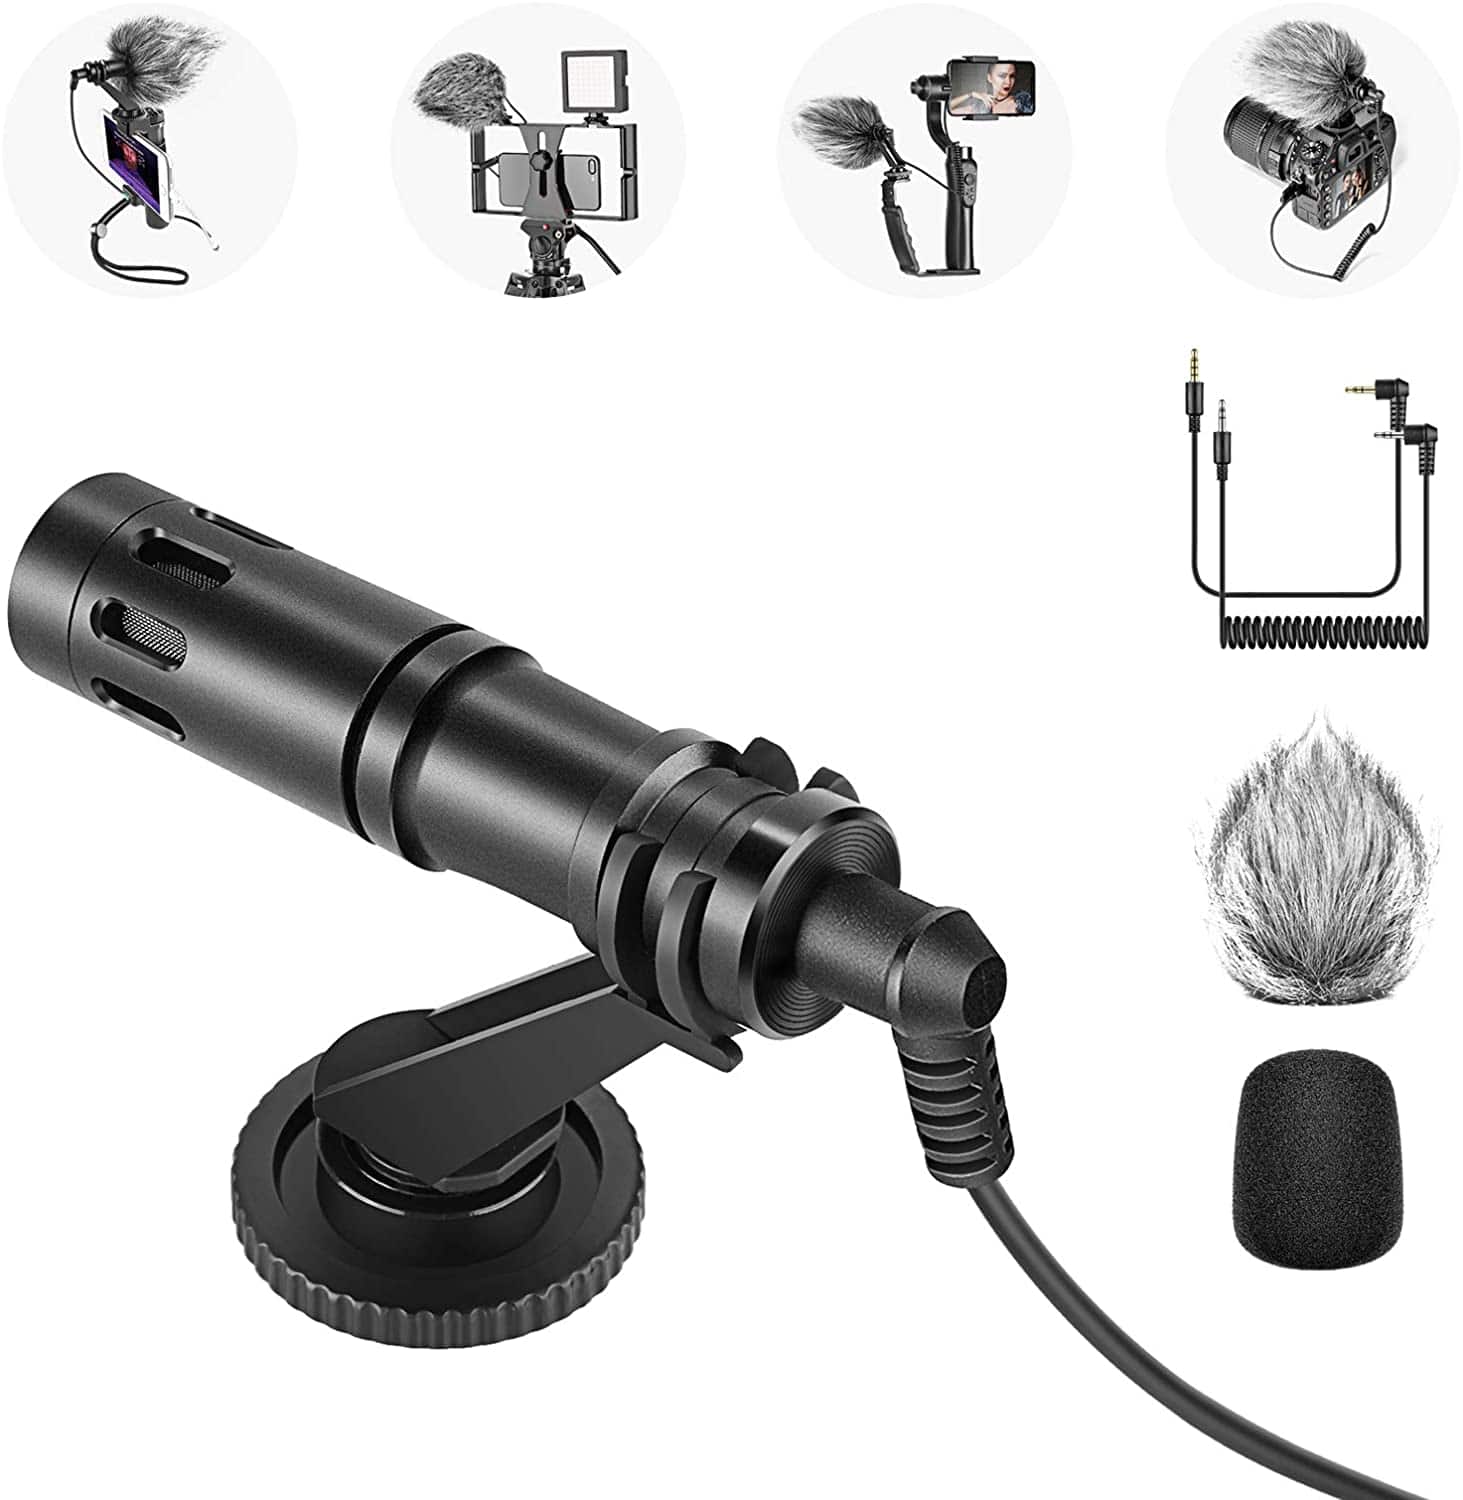 Neewer CM14 Video Microphone (3.5mm) - $14.00 + Free Shipping w/ Prime or $25+